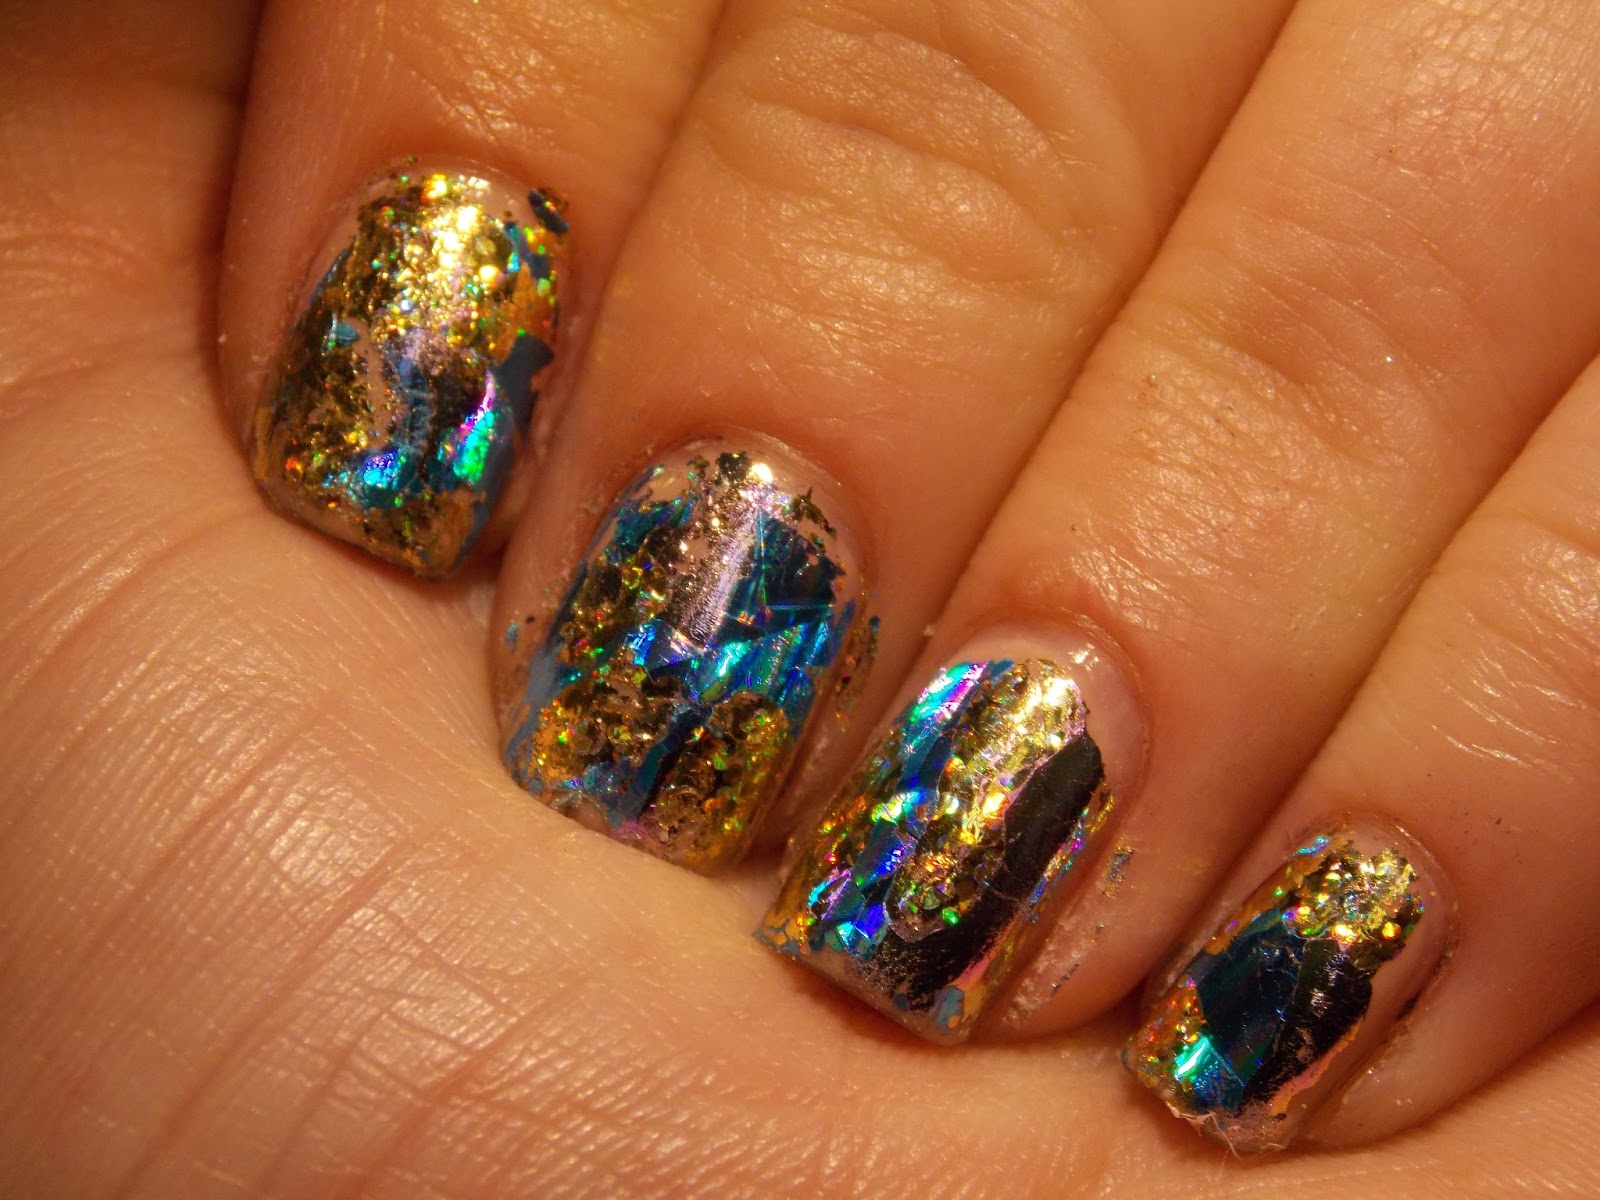 1. Foil Nail Art Designs: 30 Ideas to Get Inspired By - wide 4